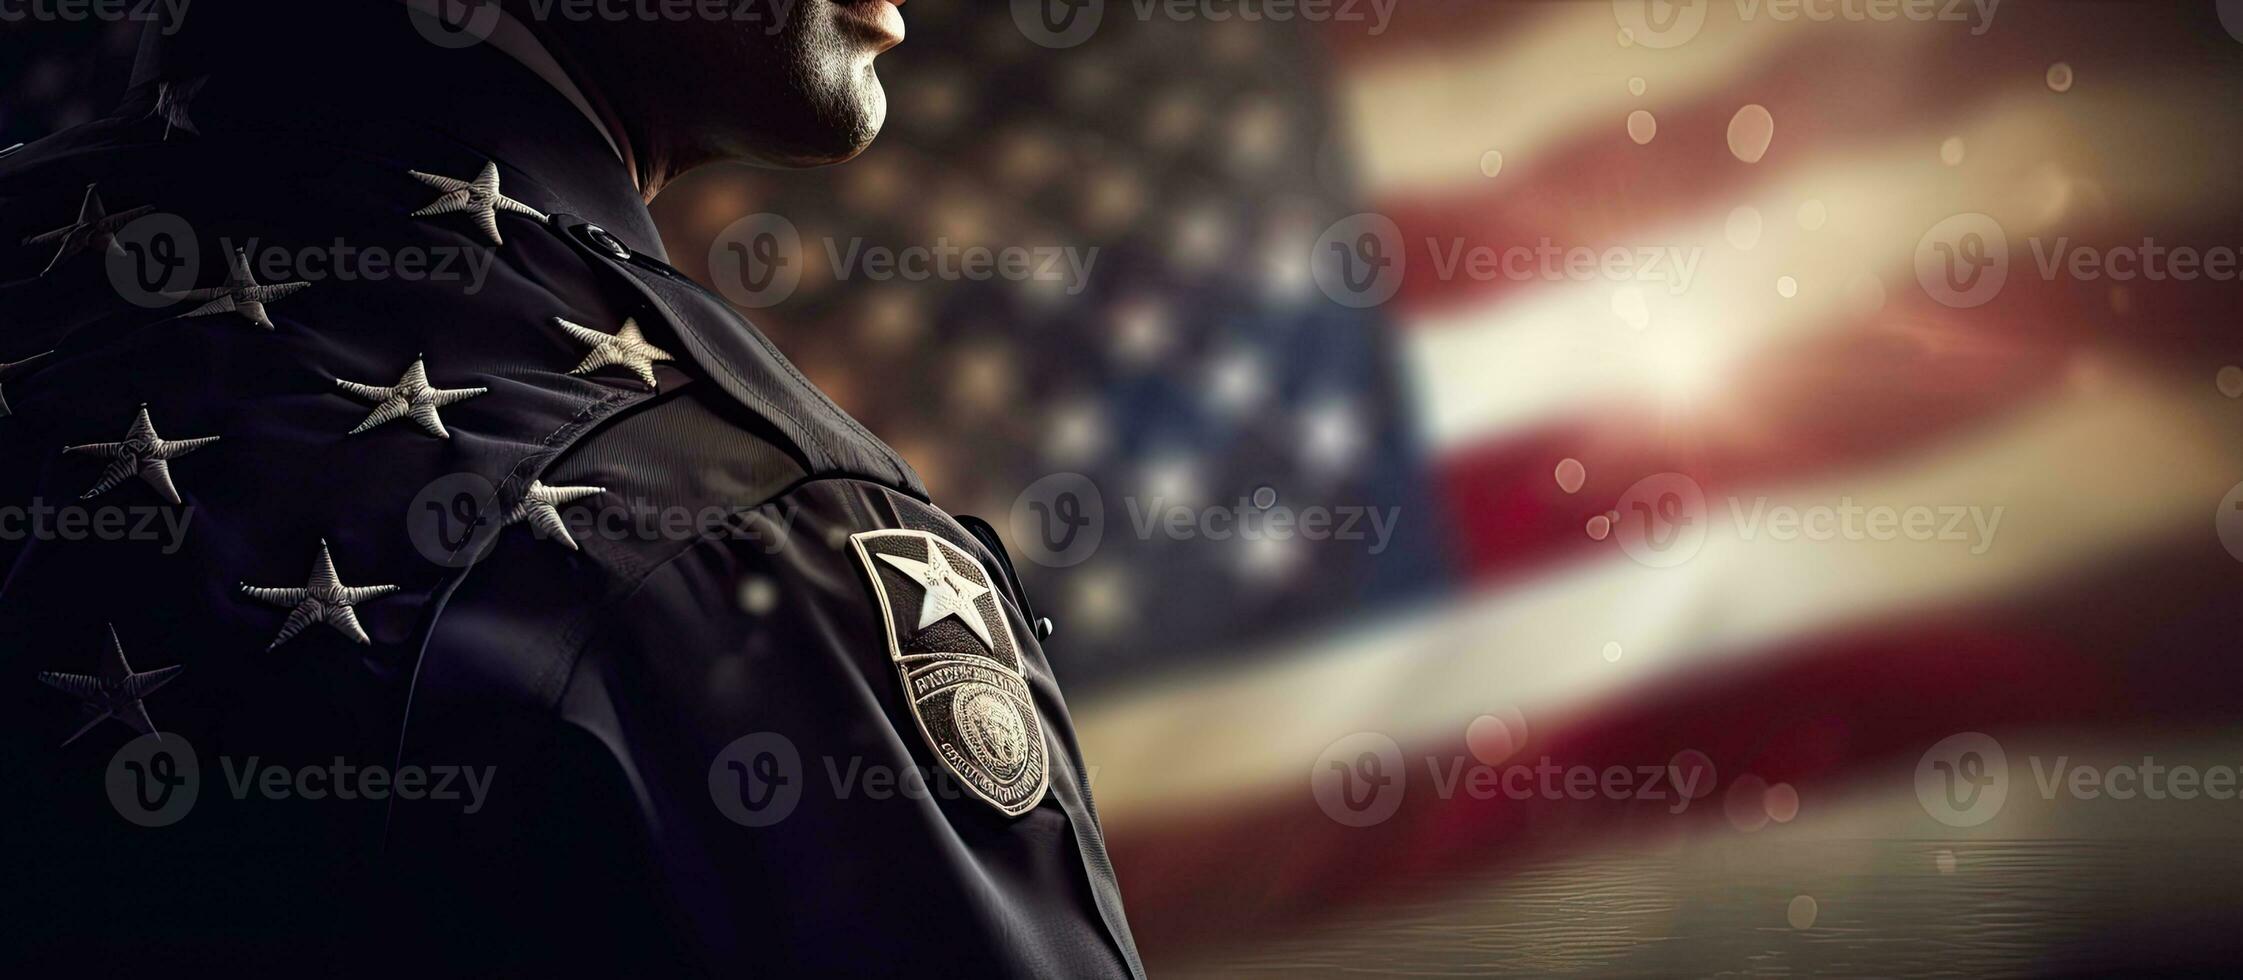 Digital image of text on American flag with copy space representing peace officer memorial day Related to patriotism and identity photo